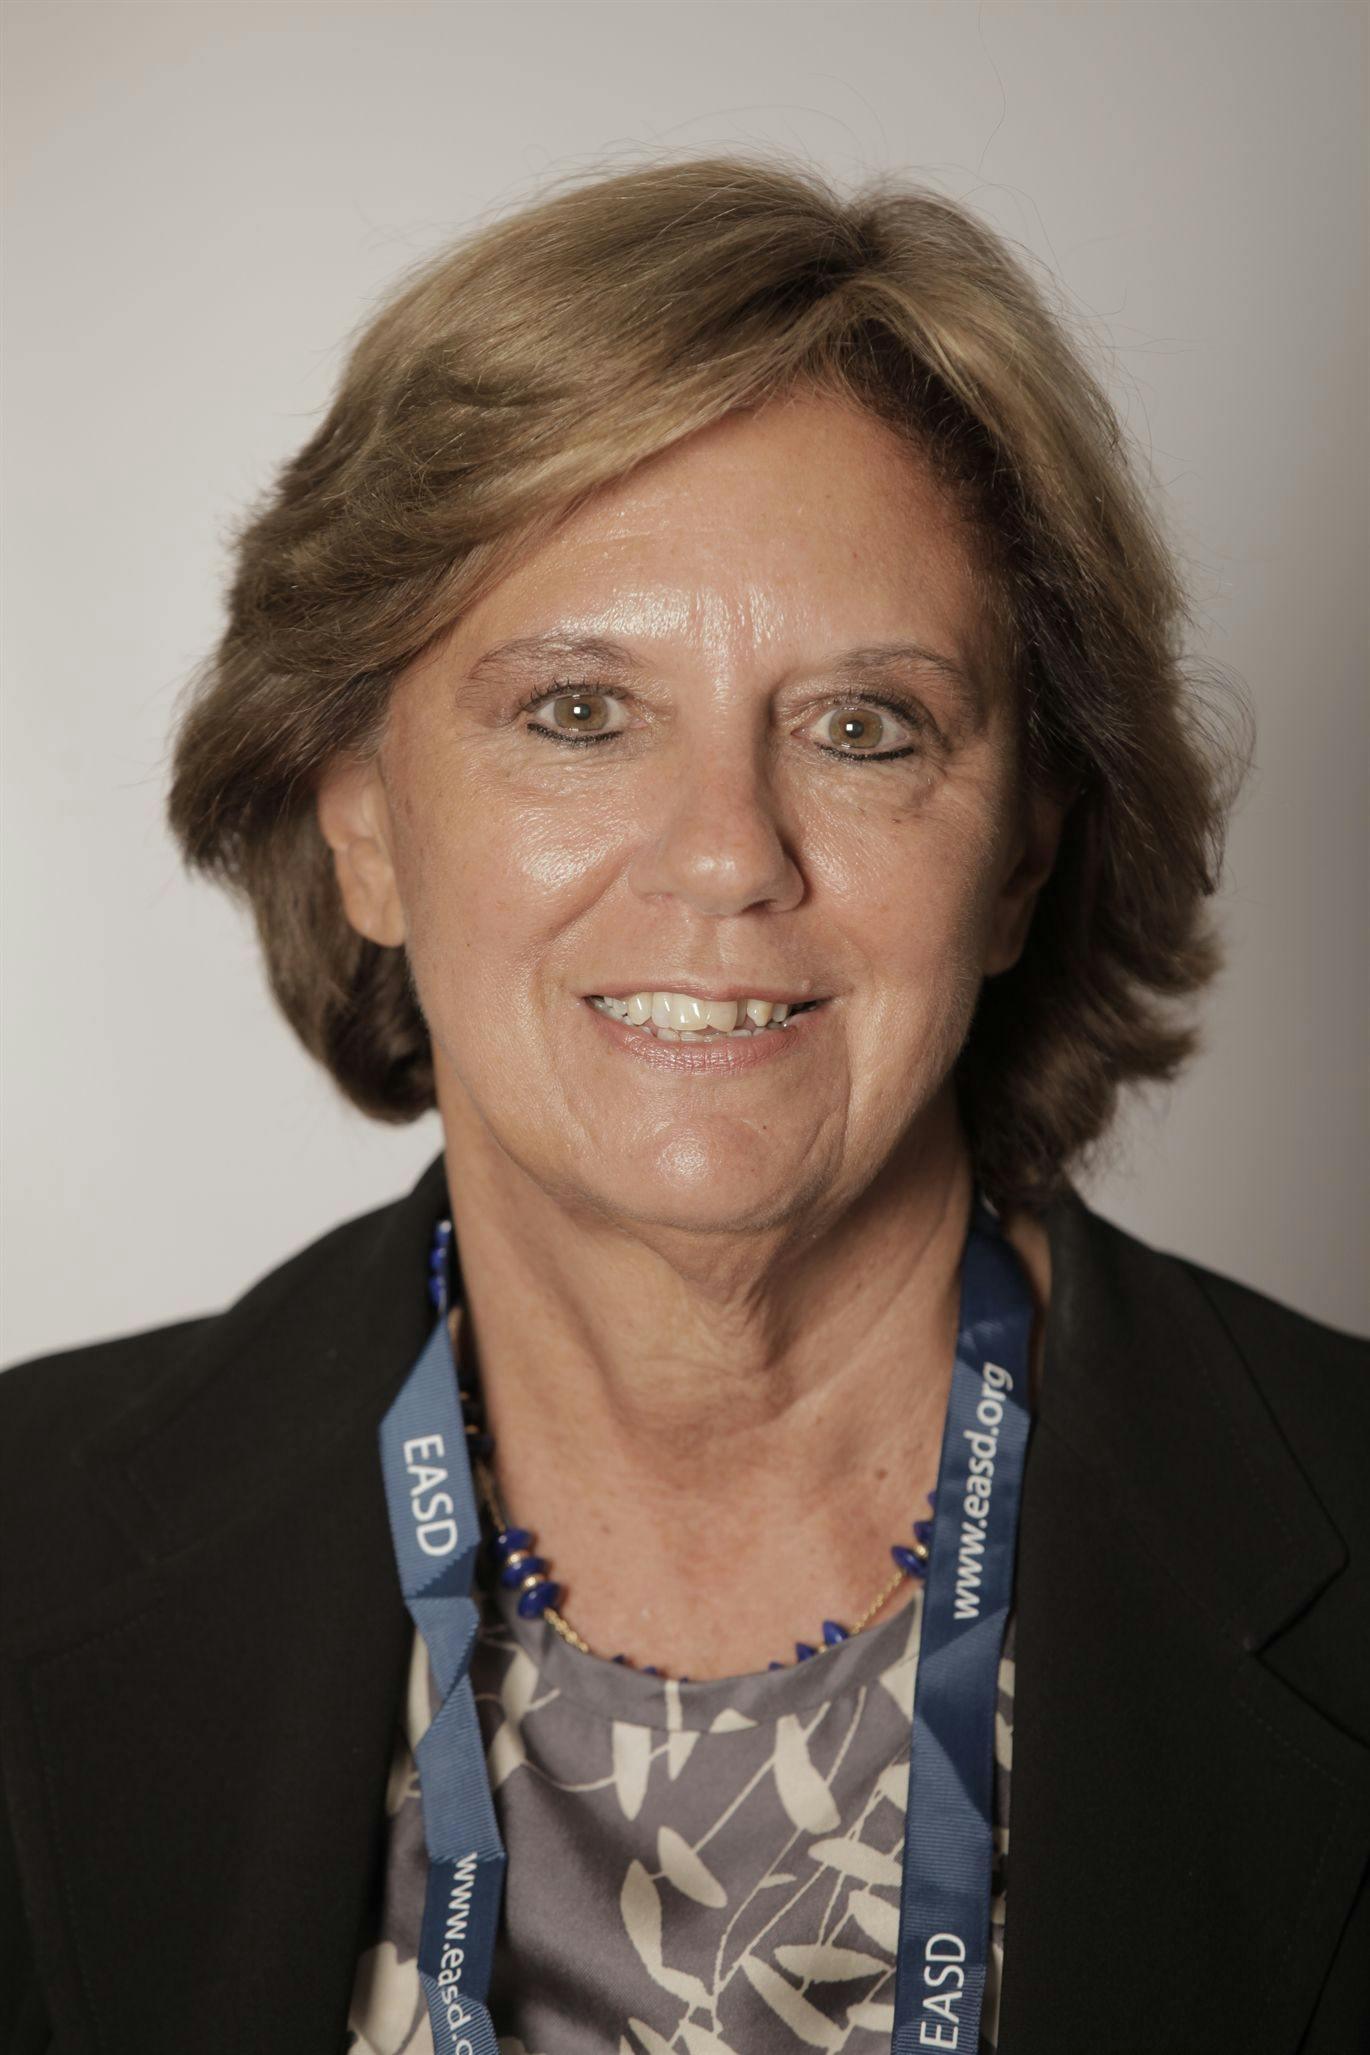 Geltrude Mingrone, MD, PhD | Credit: European Association for the Study of Diabetes